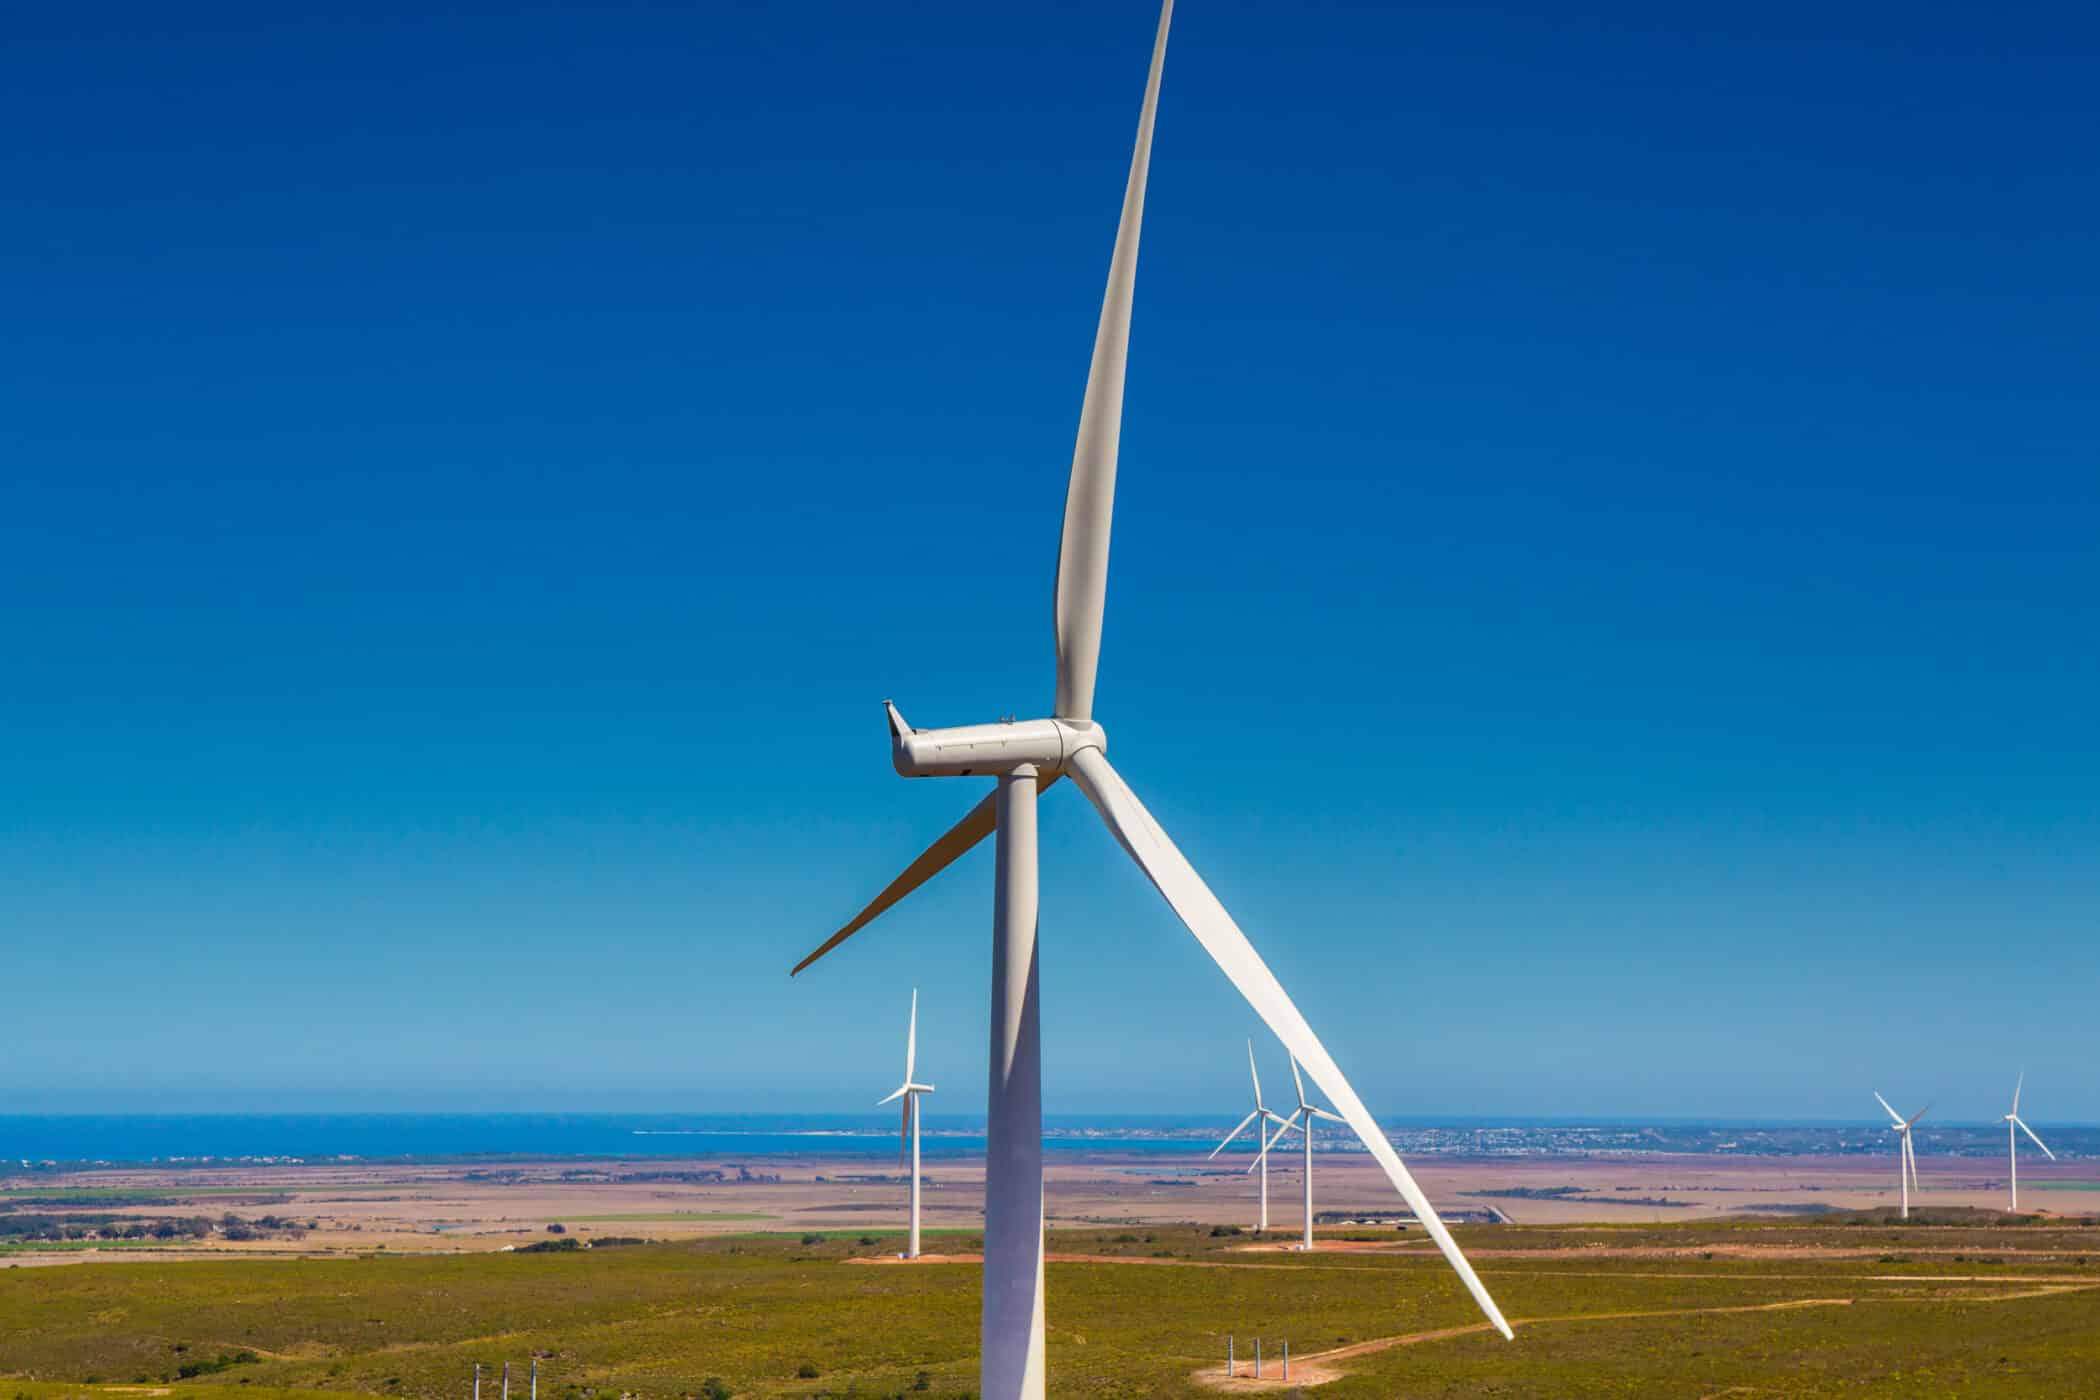 a jeffreys bay wind turbine - showing the quality of our global development standard mainstream renewable power